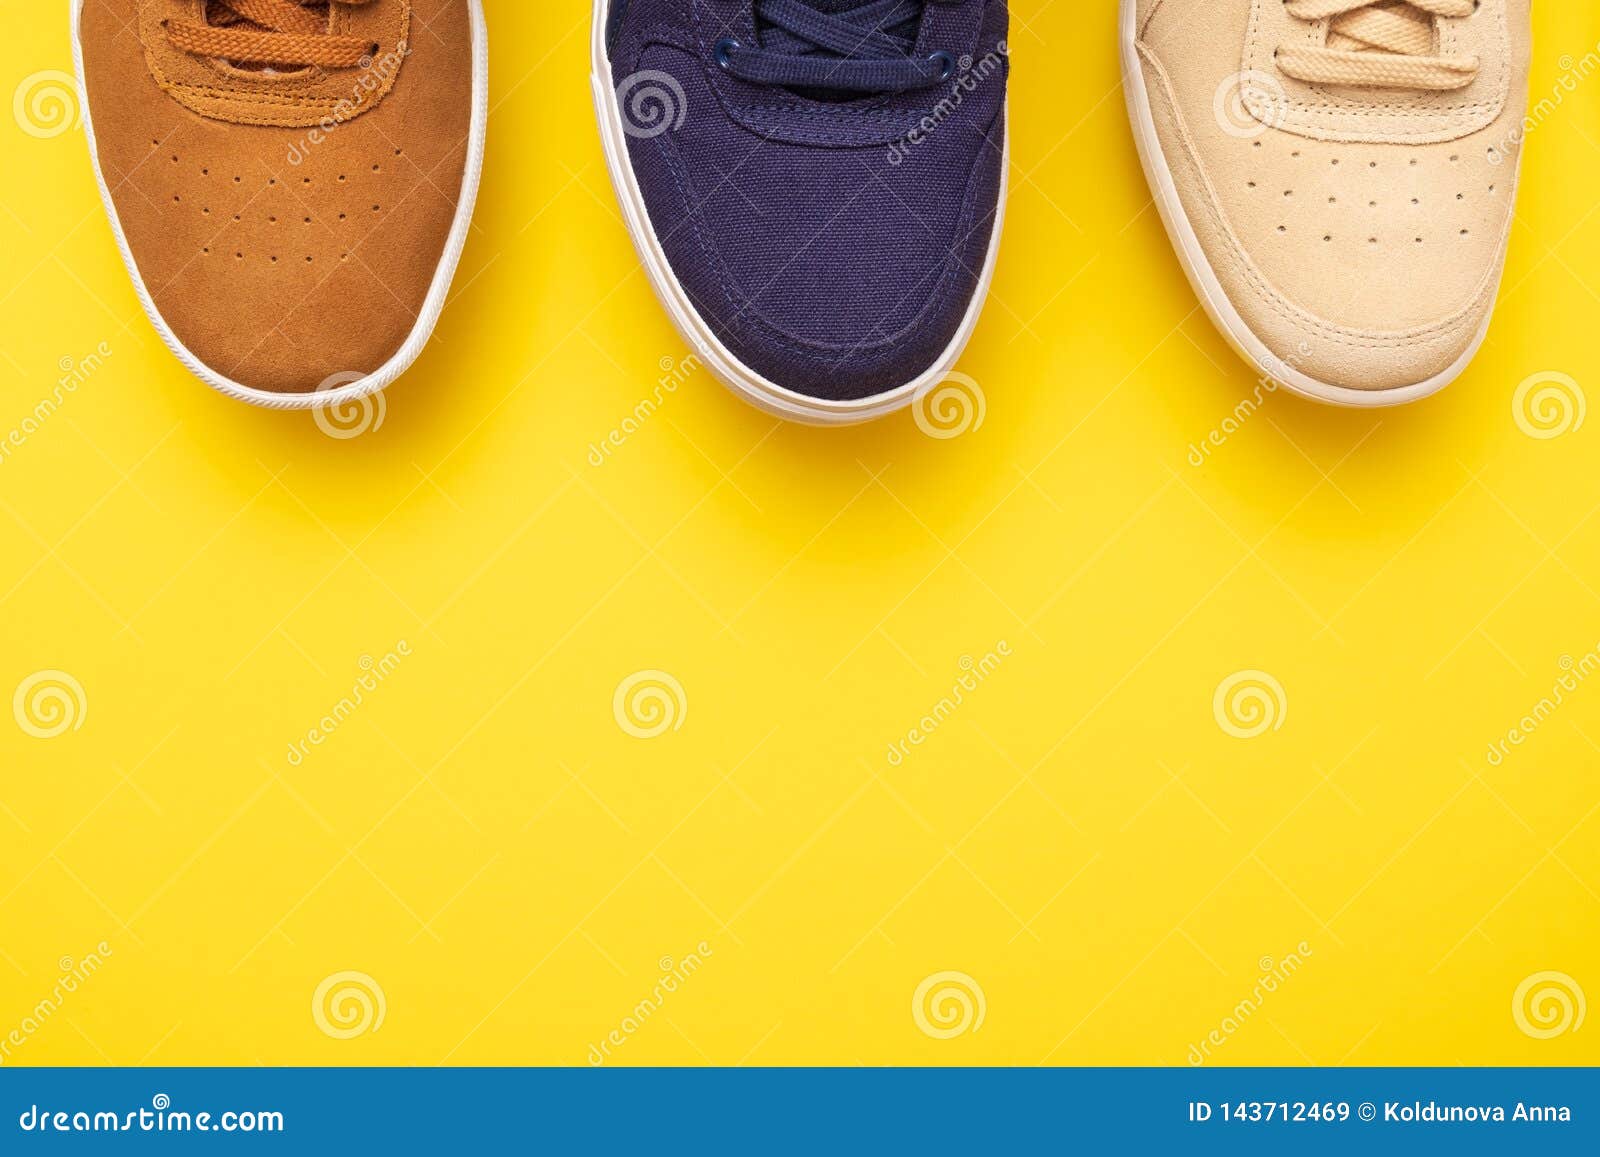 Three Pair of Sneakers on Colored Background Stock Image - Image of ...